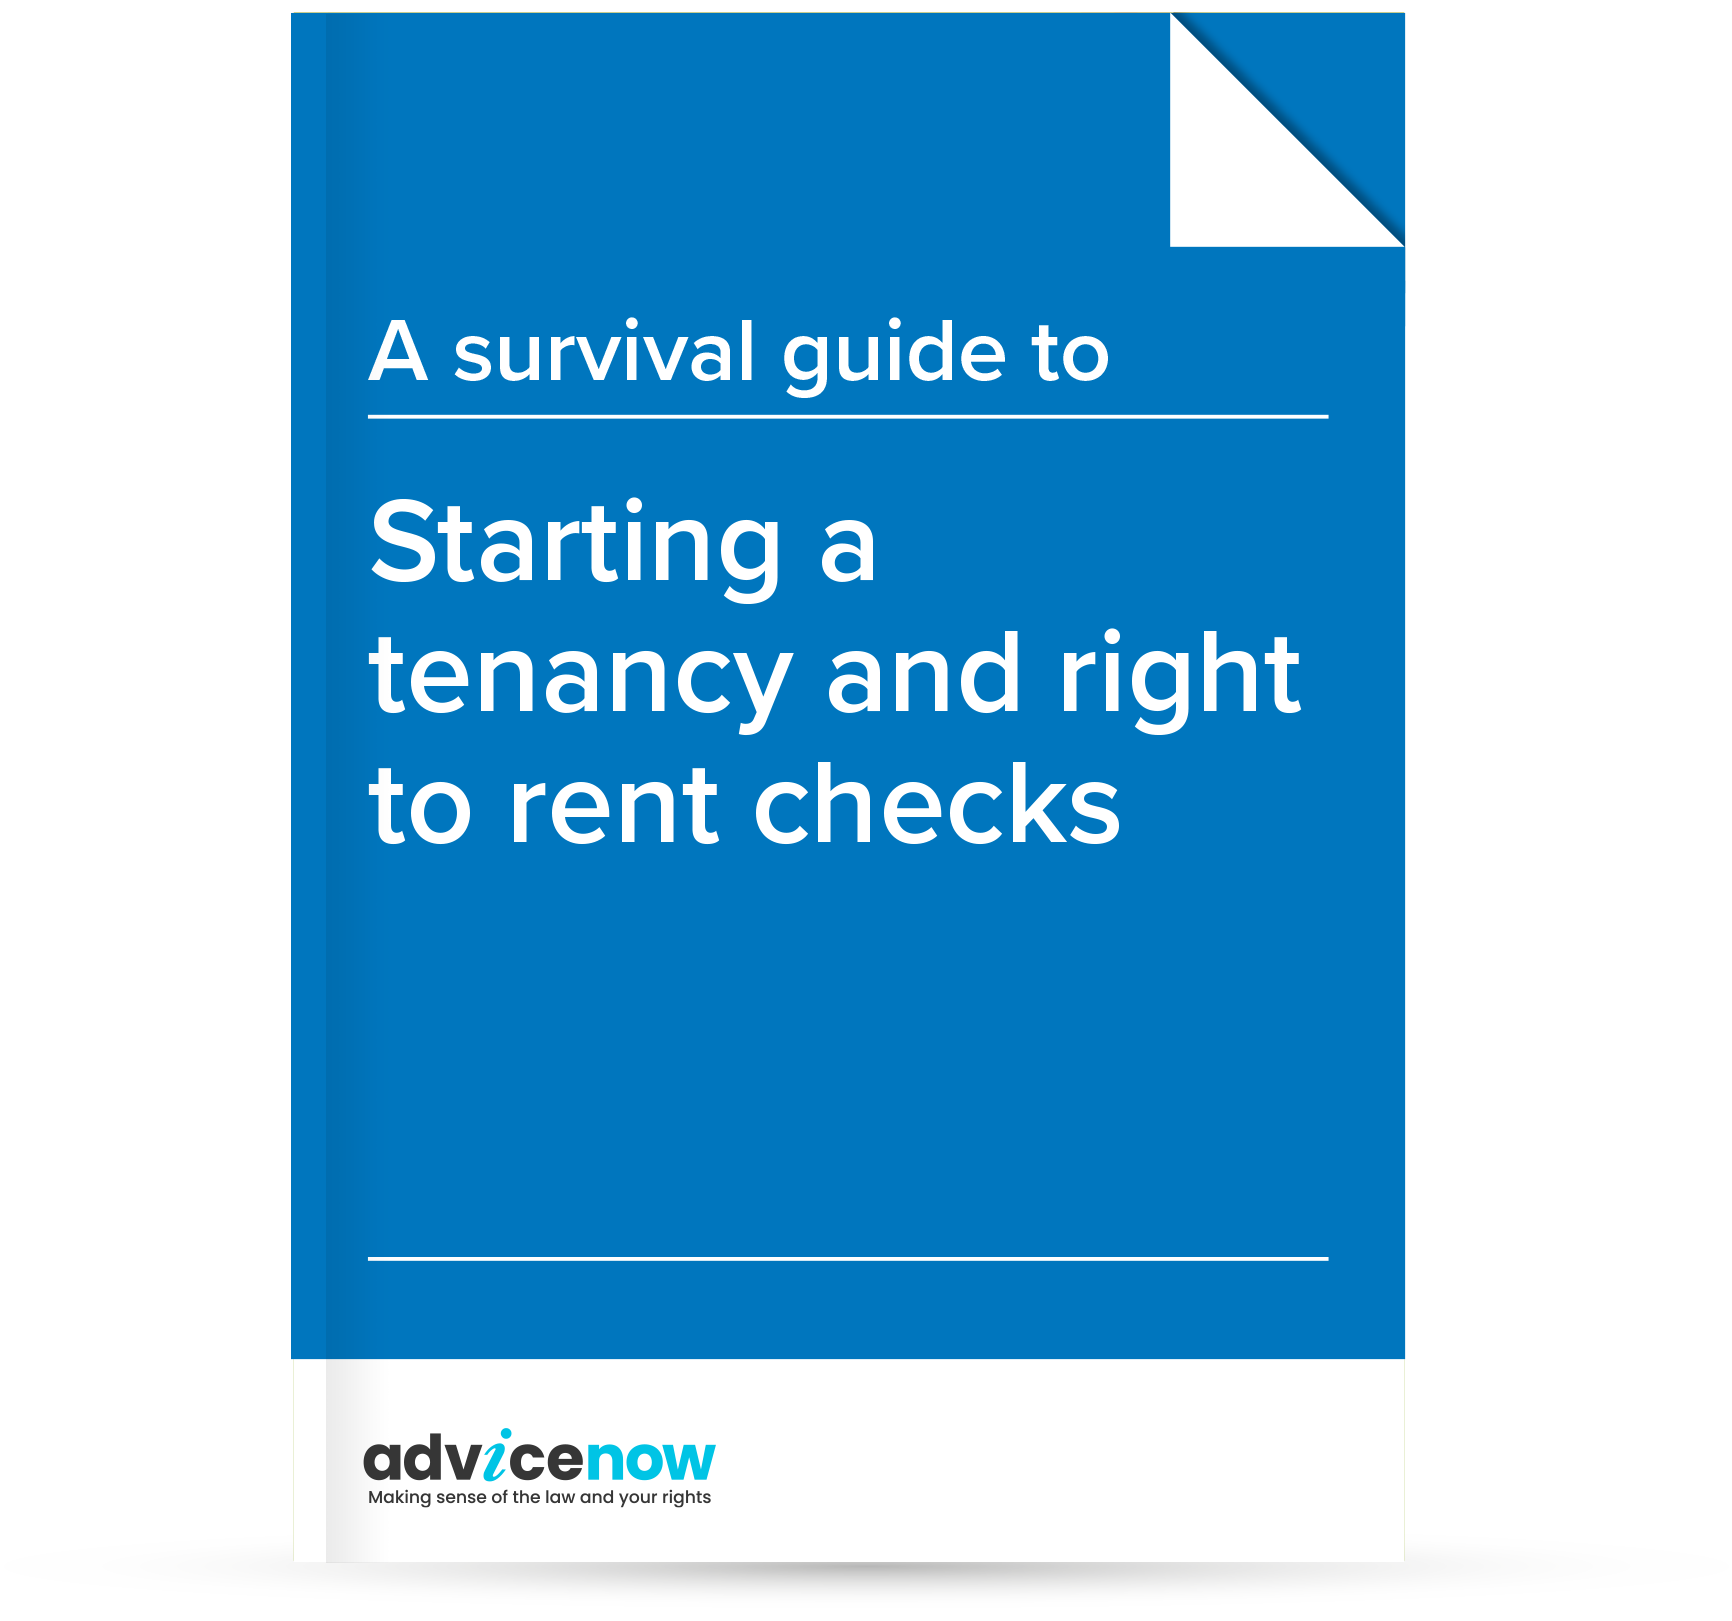 starting-a-tenancy-and-right-to-rent-checks-advicenow